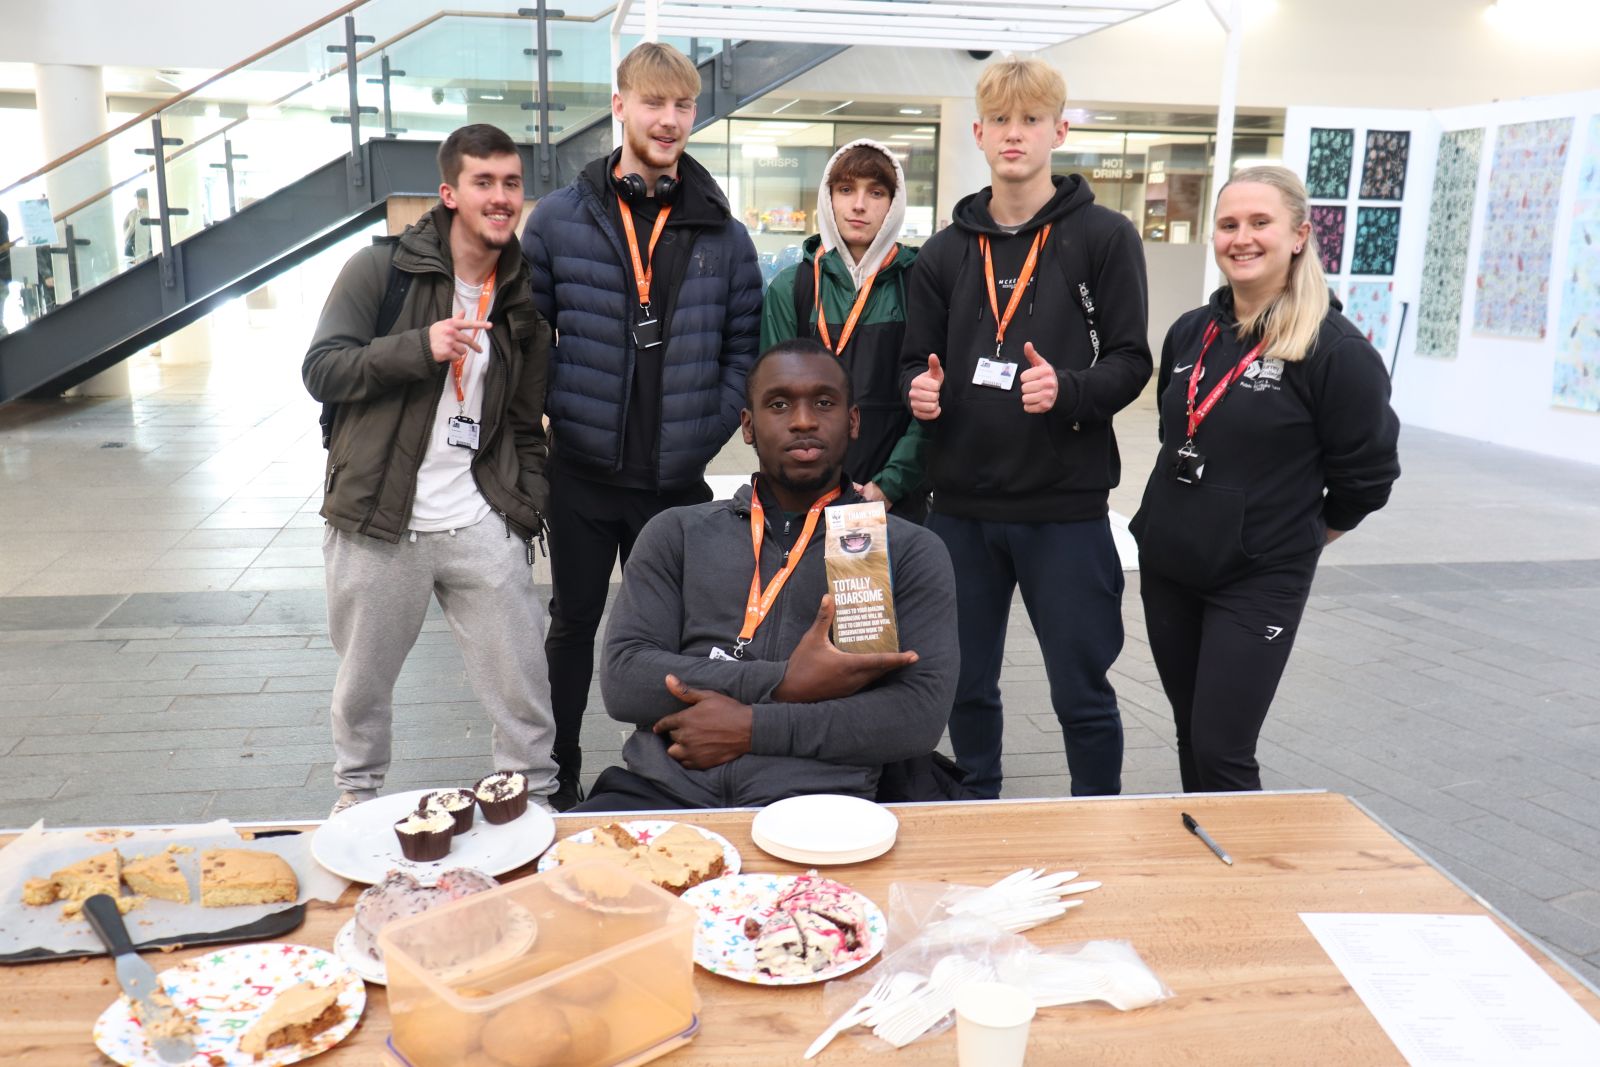 STUDENTS AT FUNDRAISING CAKE SALE